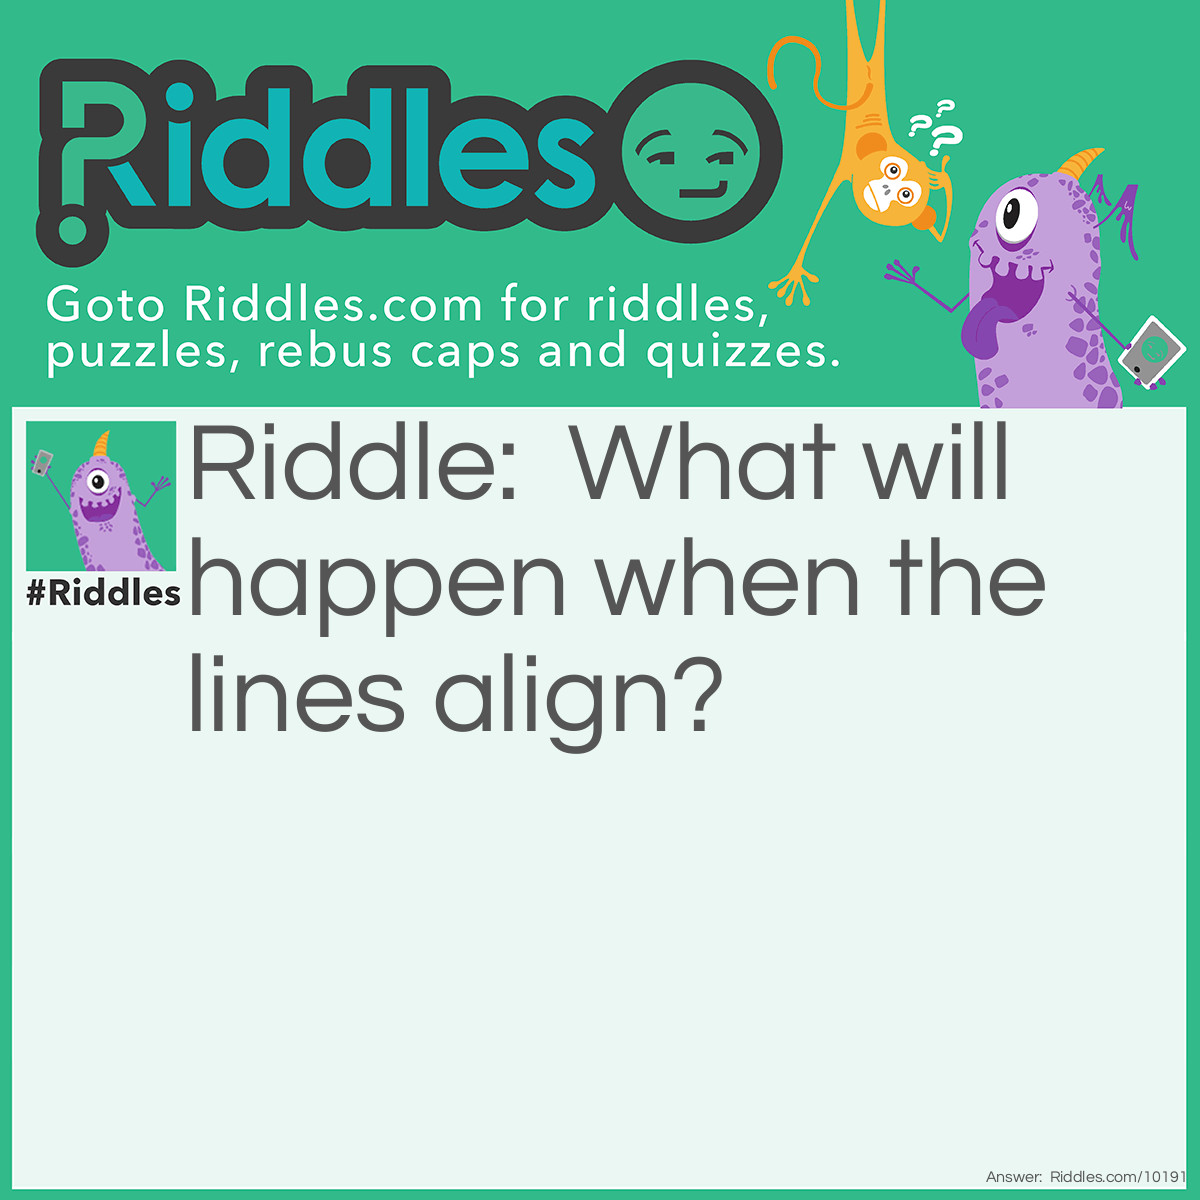 Riddle: What will happen when the lines align? Answer: Nothing. Nothing happens when the clock lines align (except for the bell).